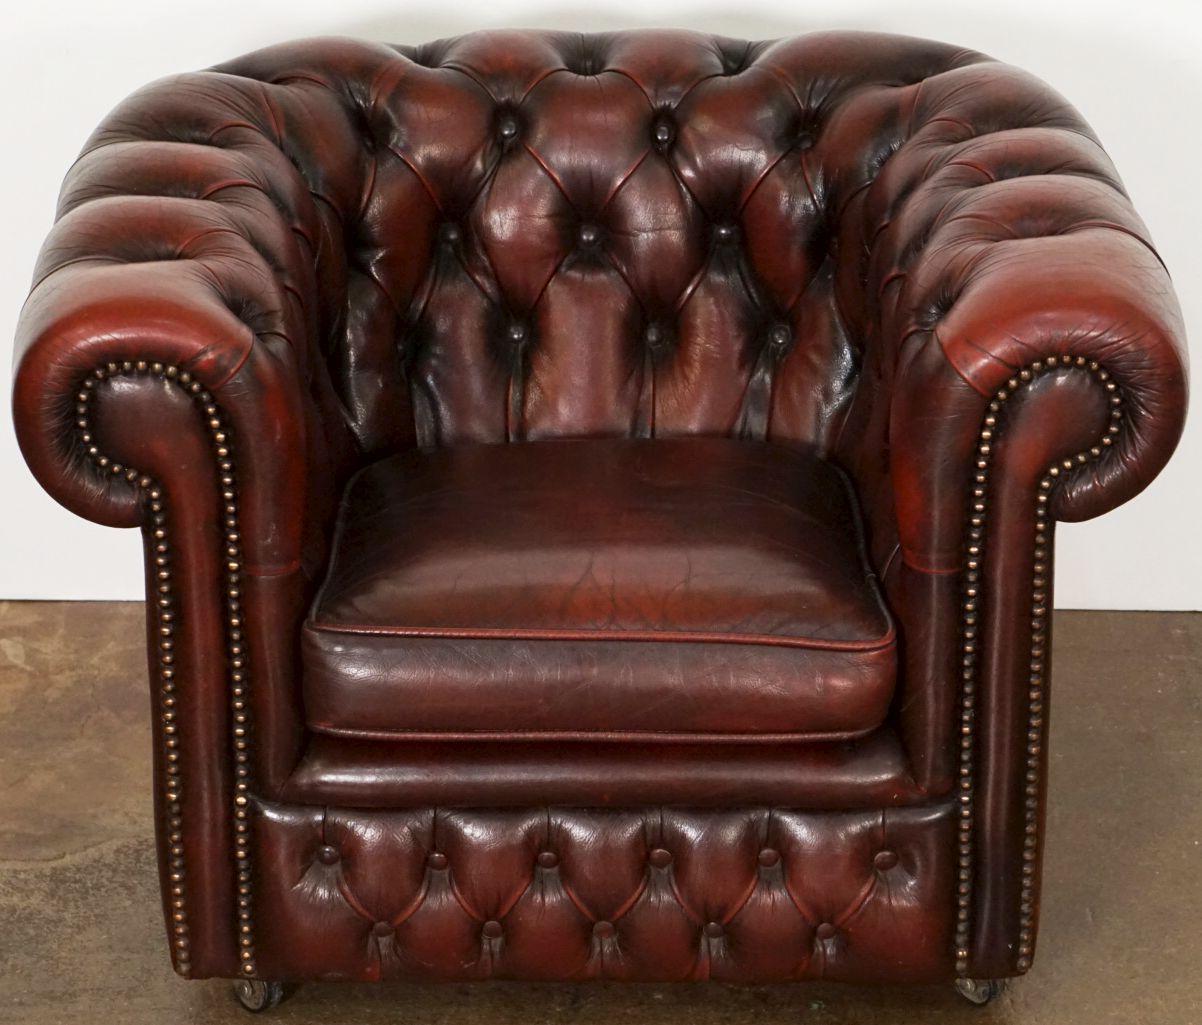 Mid-Century Modern Child's Leather Chesterfield Club Chair from England For Sale